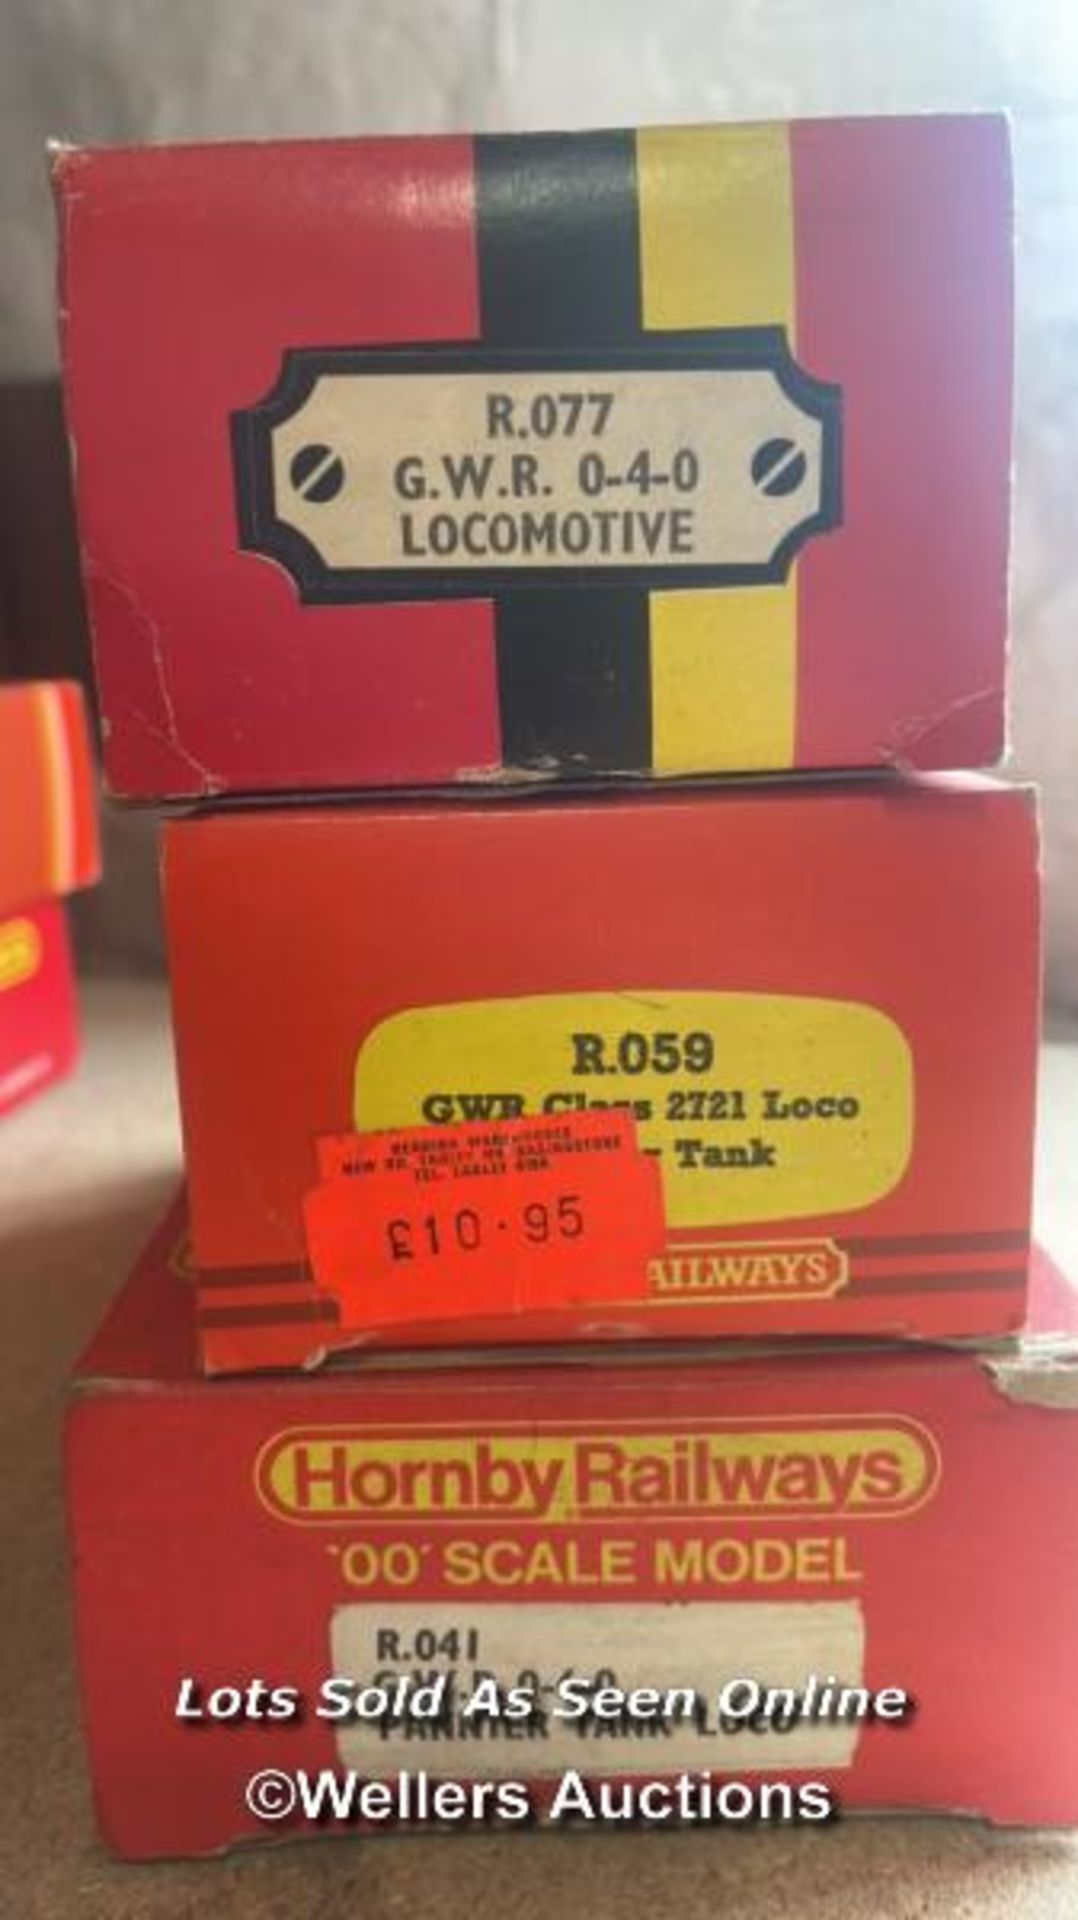 FIVE BOXED HORNBY MODEL TRAINS INCLUDING R.761 G.W.R. HALL LOCOMOTIVE - Image 6 of 6